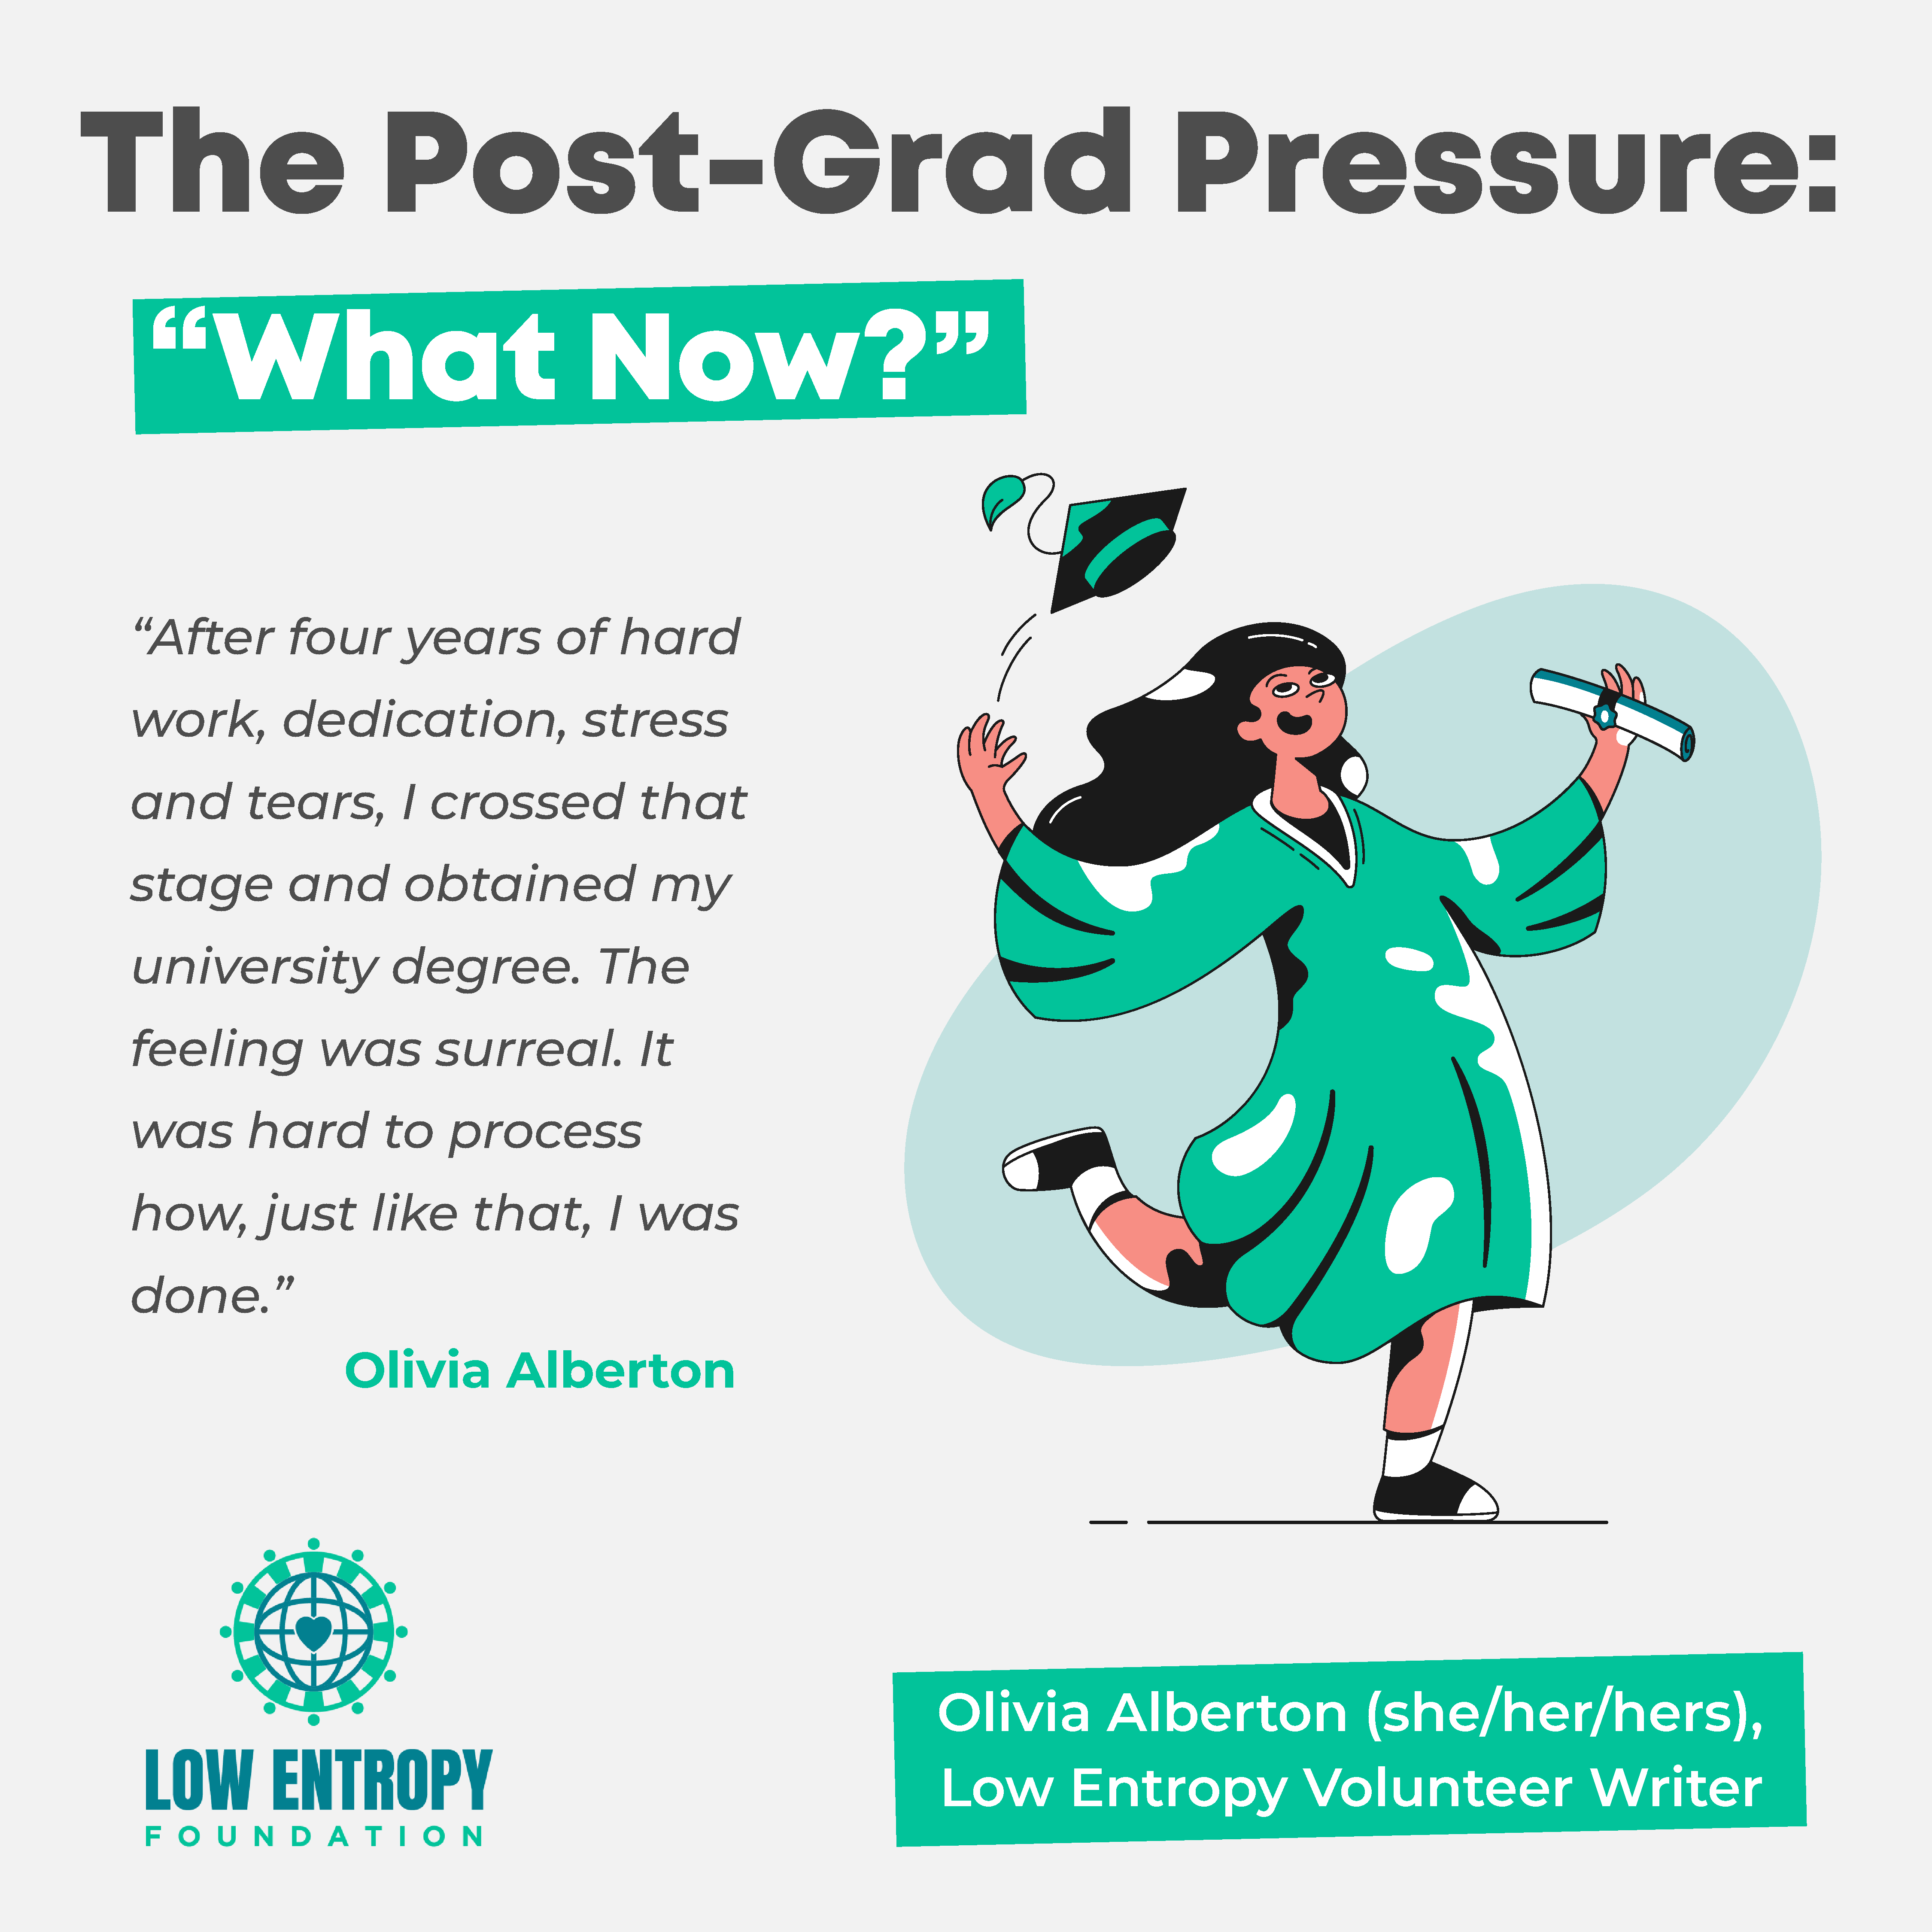 The Post-Grad Pressure: “What Now?”